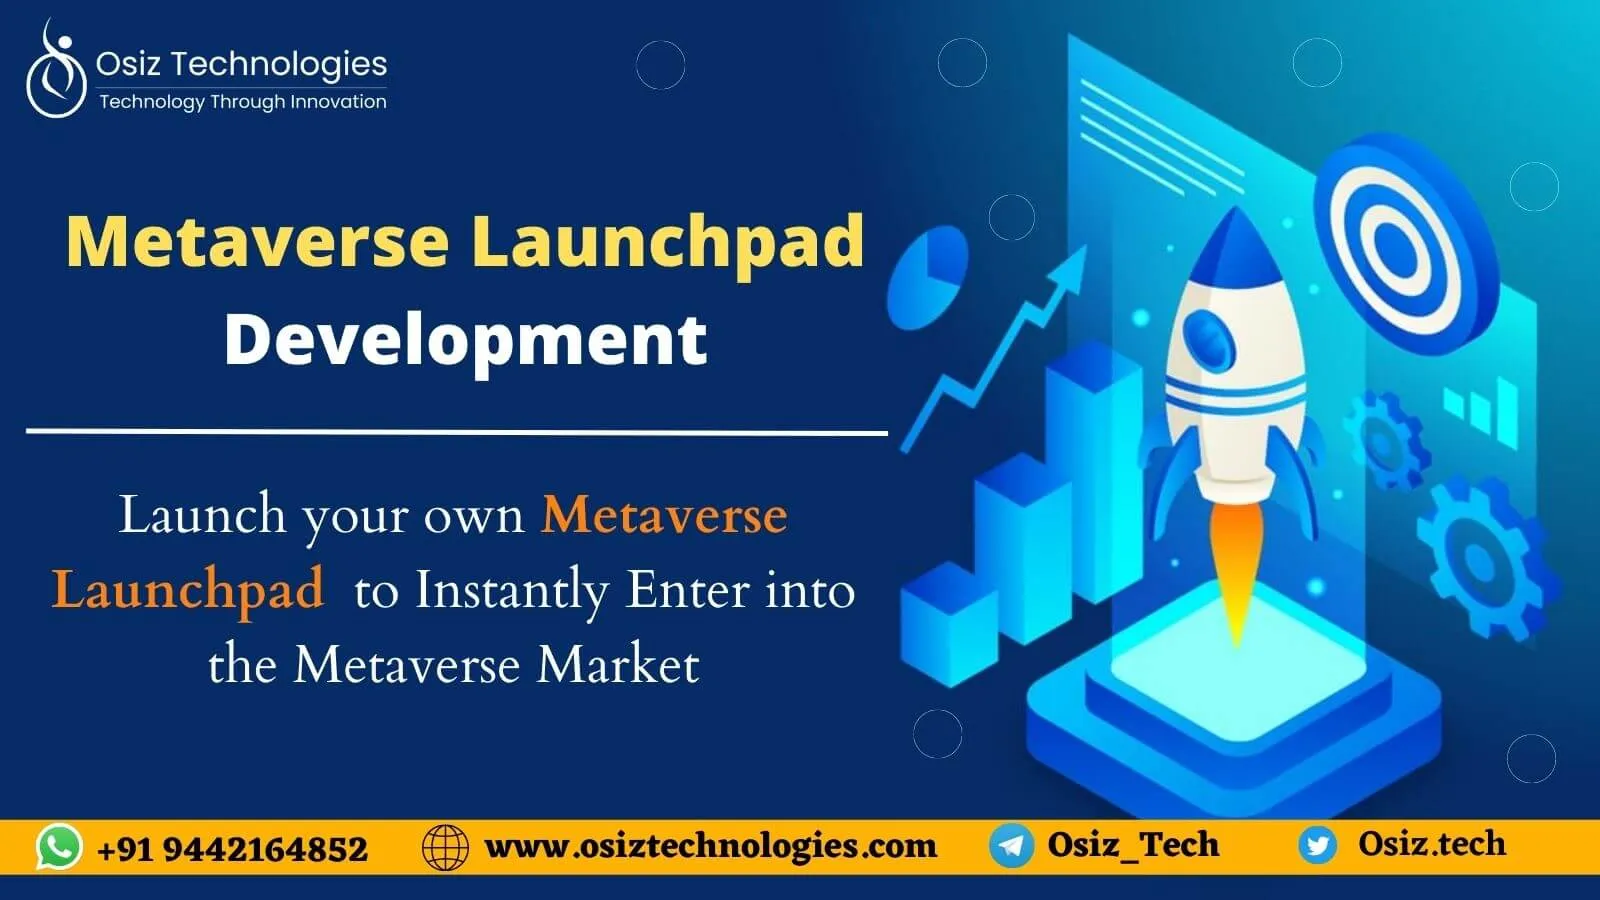 How To Build your Metaverse Launchpad Platform as you Desire?